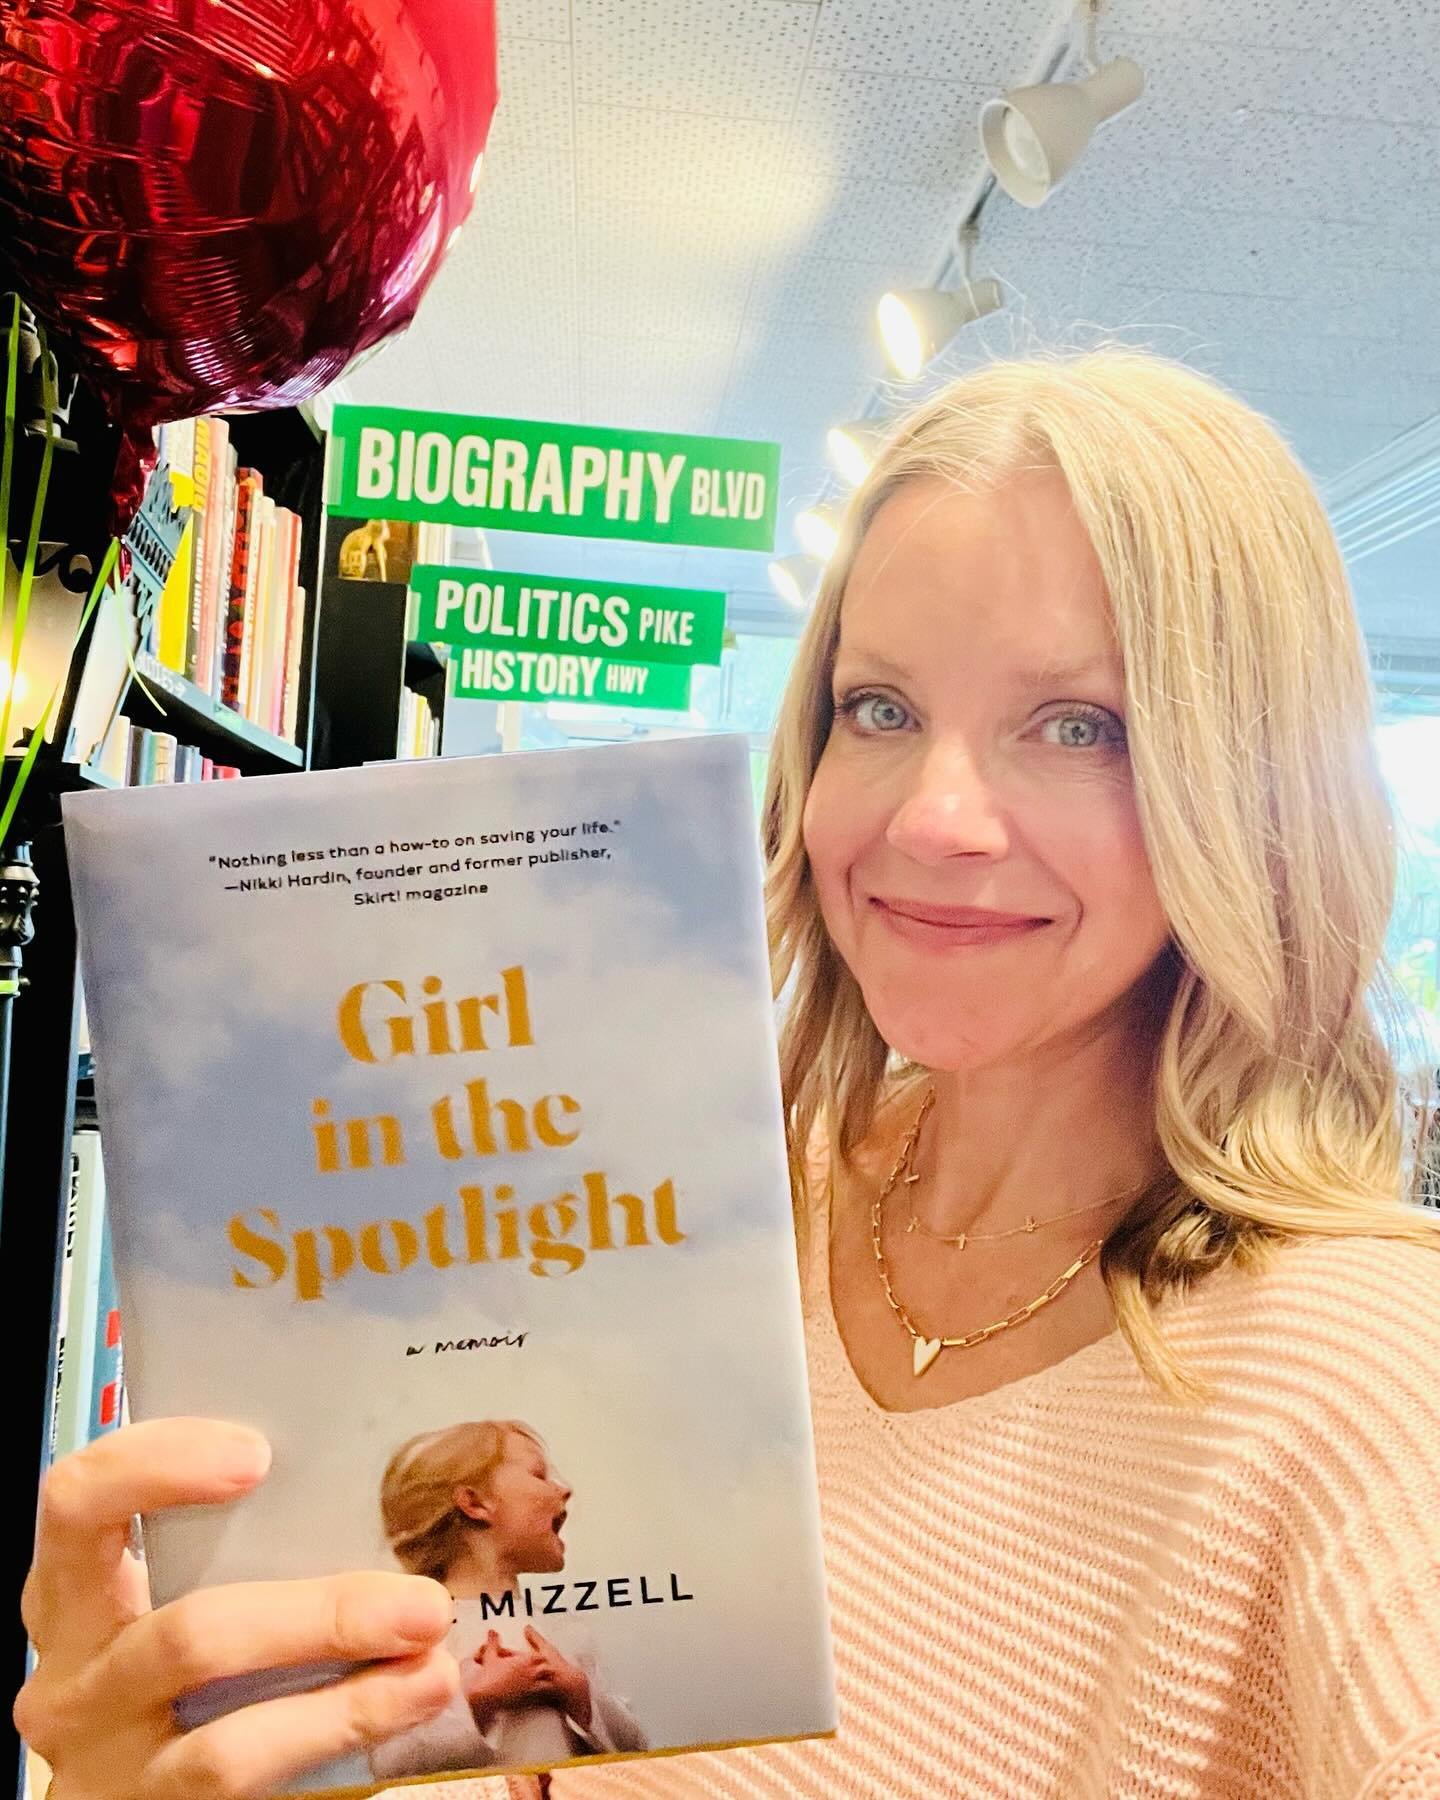 Please support the Independent Bookstores that support my book! You can find &ldquo;Girl in the Spotlight&rdquo; at Main Street Reads in Summerville, Buxton Books in Charleston, and Eat My Words in Minneapolis. 

You can also go to Bookshop.org and o